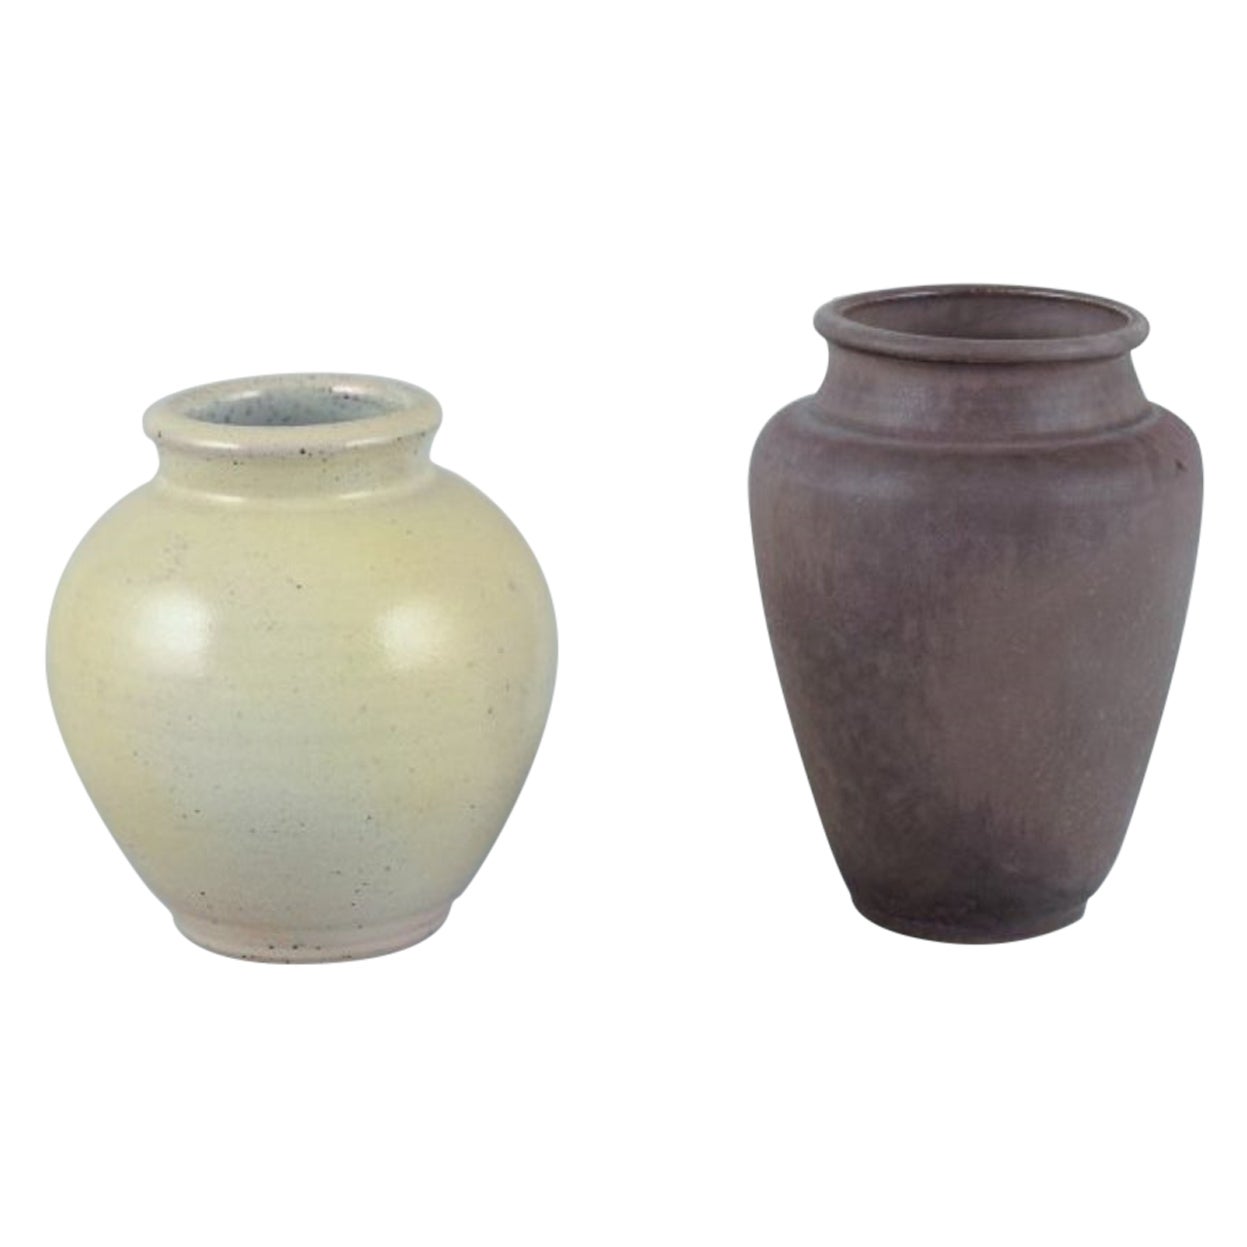 Elly Kuch and Wilhelm Kuch. Two small ceramic vases. From the 1980s